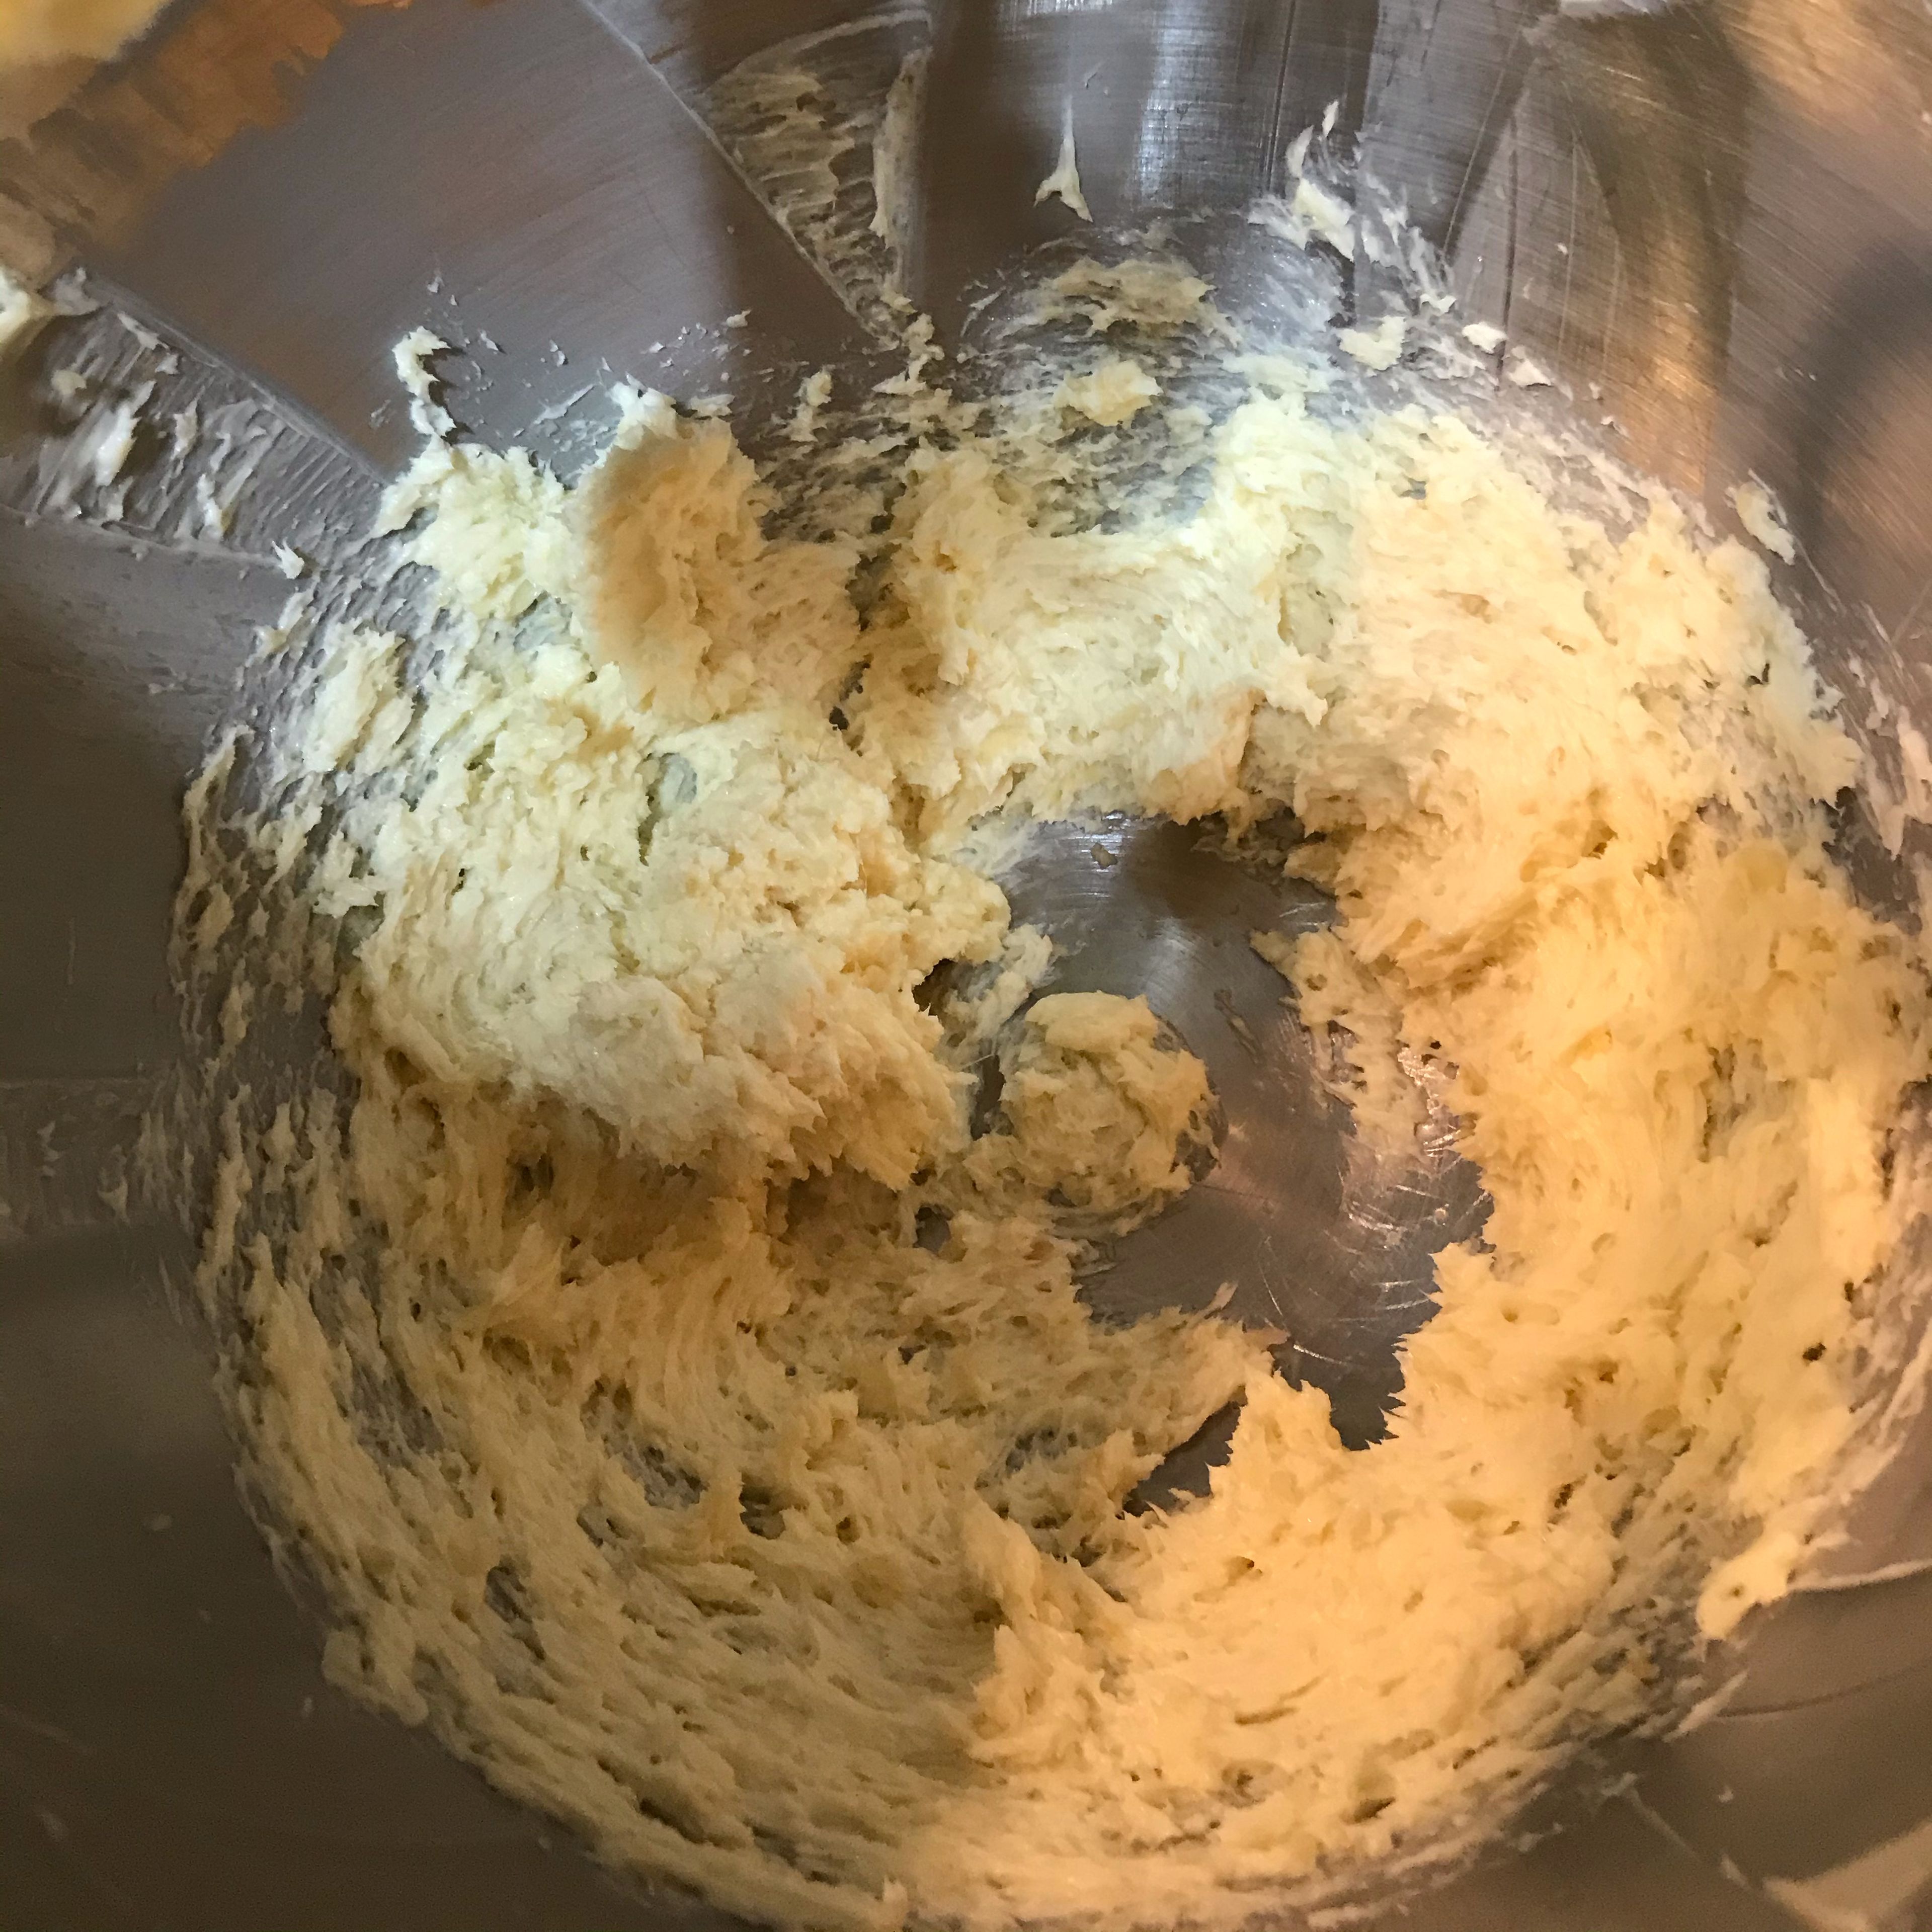 We are going to cream the butter with the ginger. Make sure the butter is soft. Mix the butter and the grated ginger on low speed for 2 minutes. If you don’t have a mixer, you can use a wooden spoon or silicone spatula, mix the butter and ginger in a large bowl until creamy and well blended.